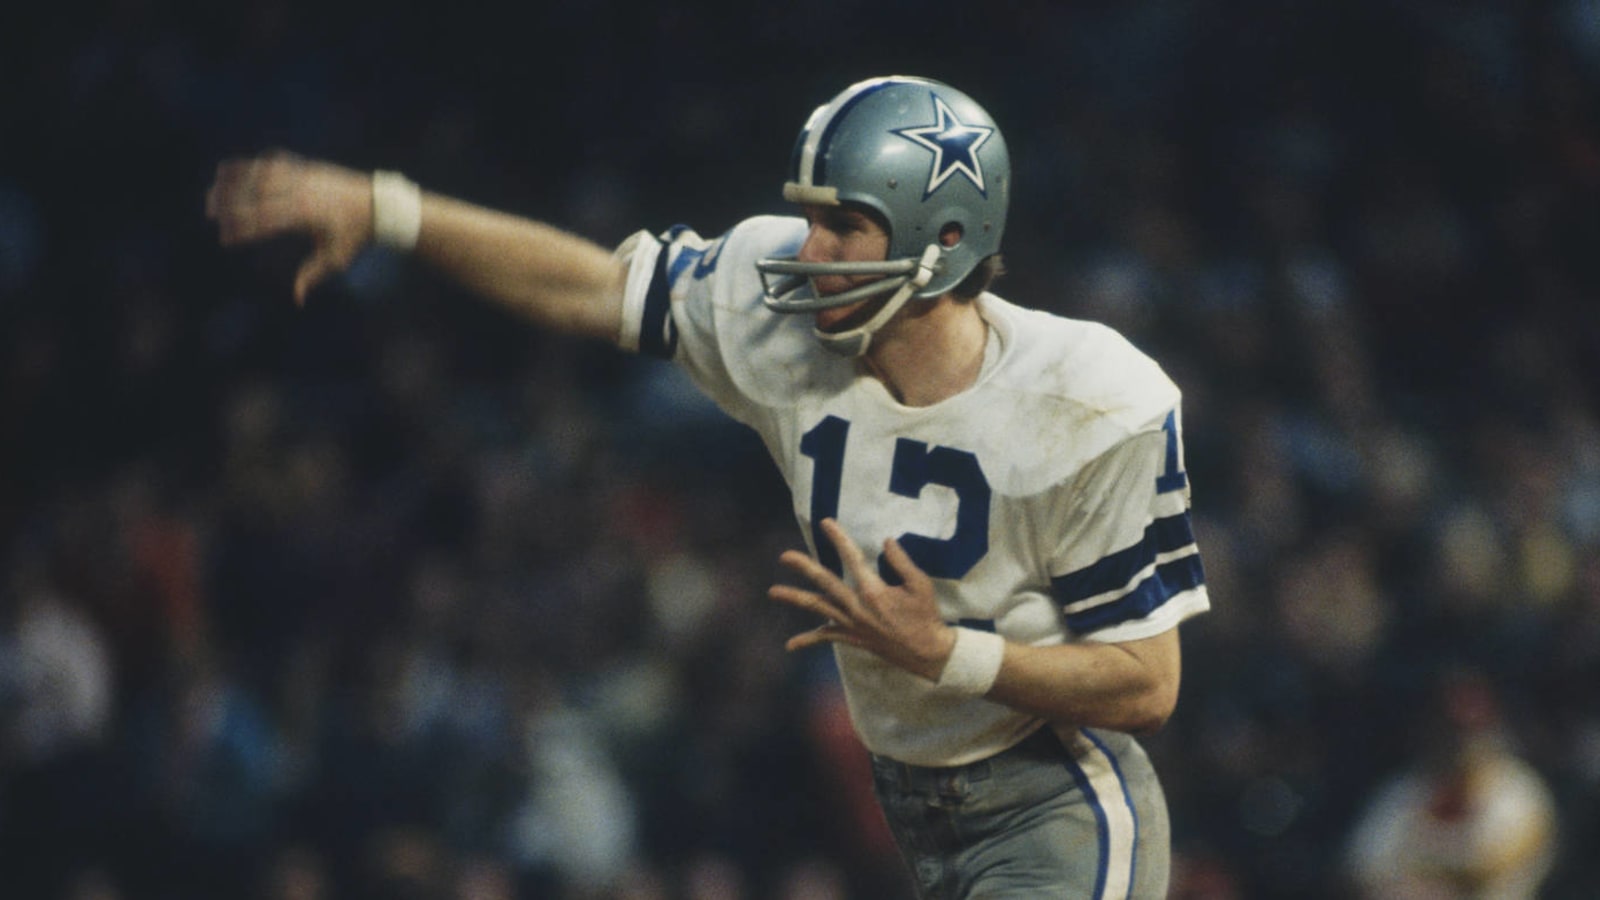 The 'NFL All-Decade Team of the 1970s' quiz